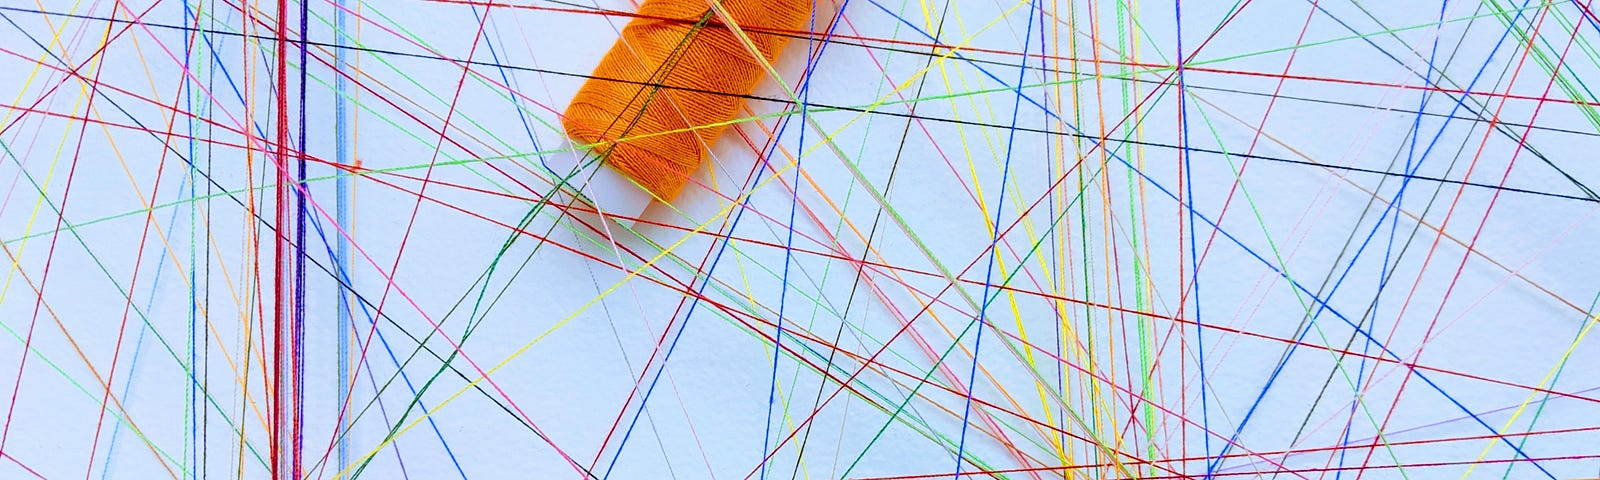 A network of colored string